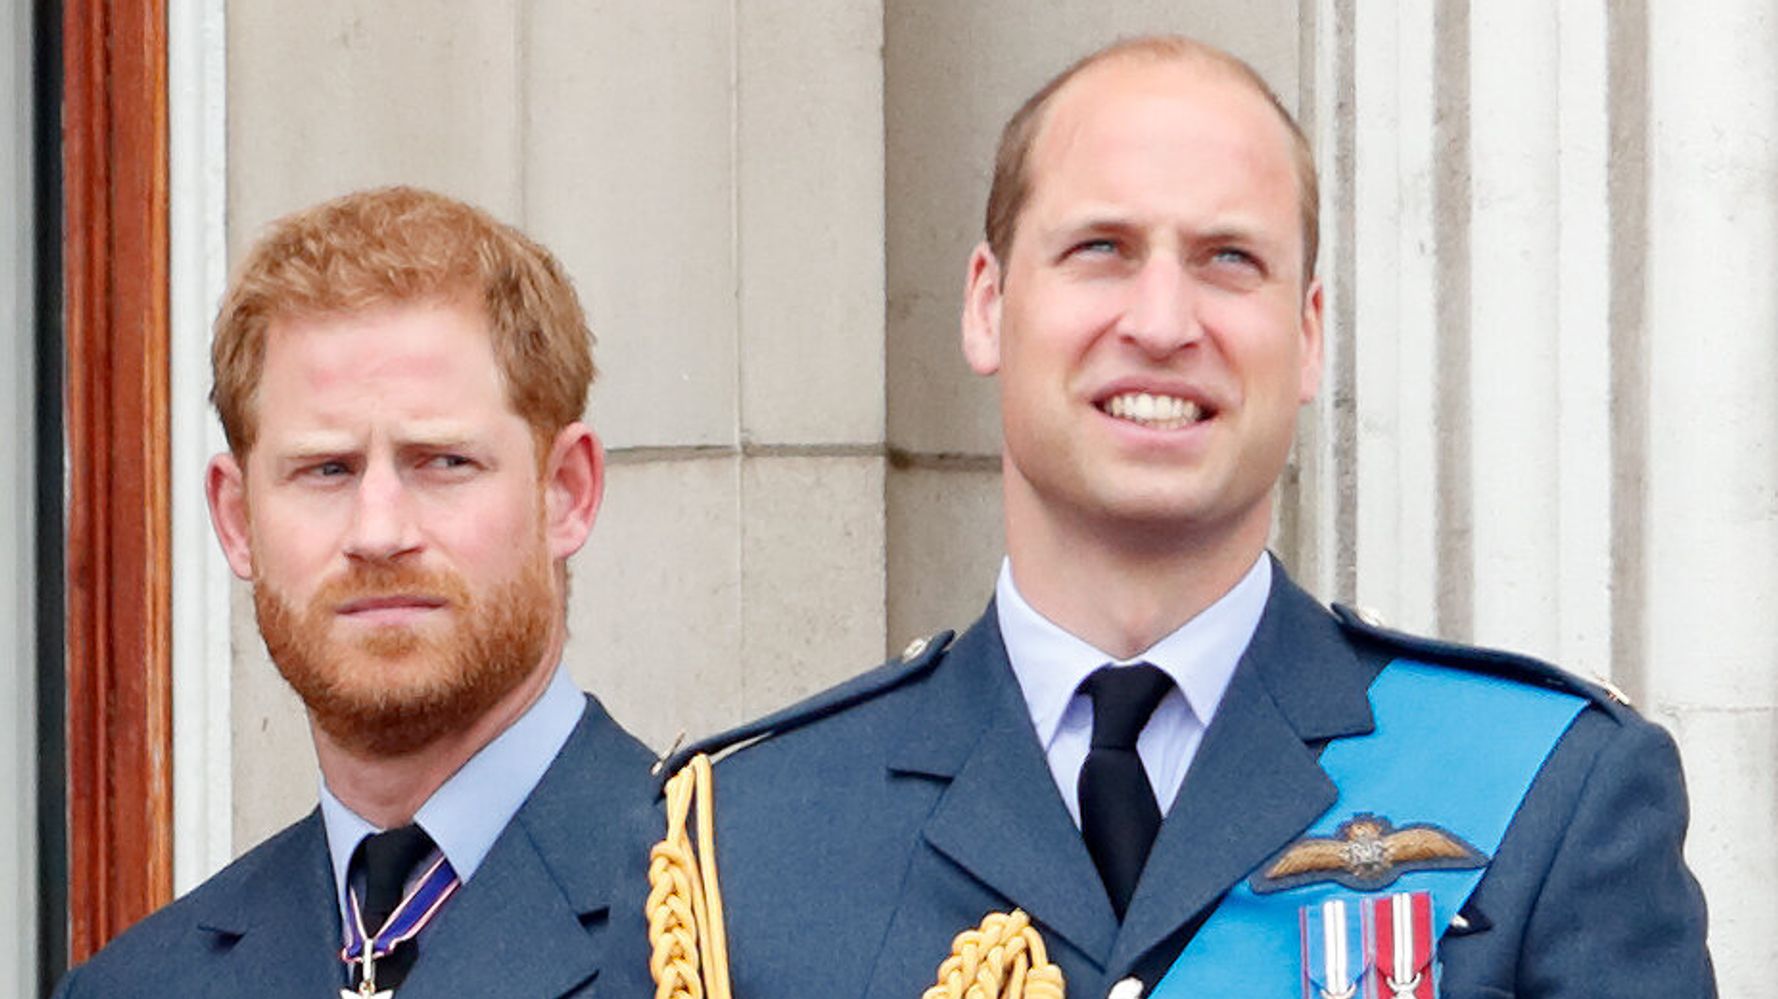 Prince Harry Says He Wanted To Leave Royal Life By The Time He Was In His 20s